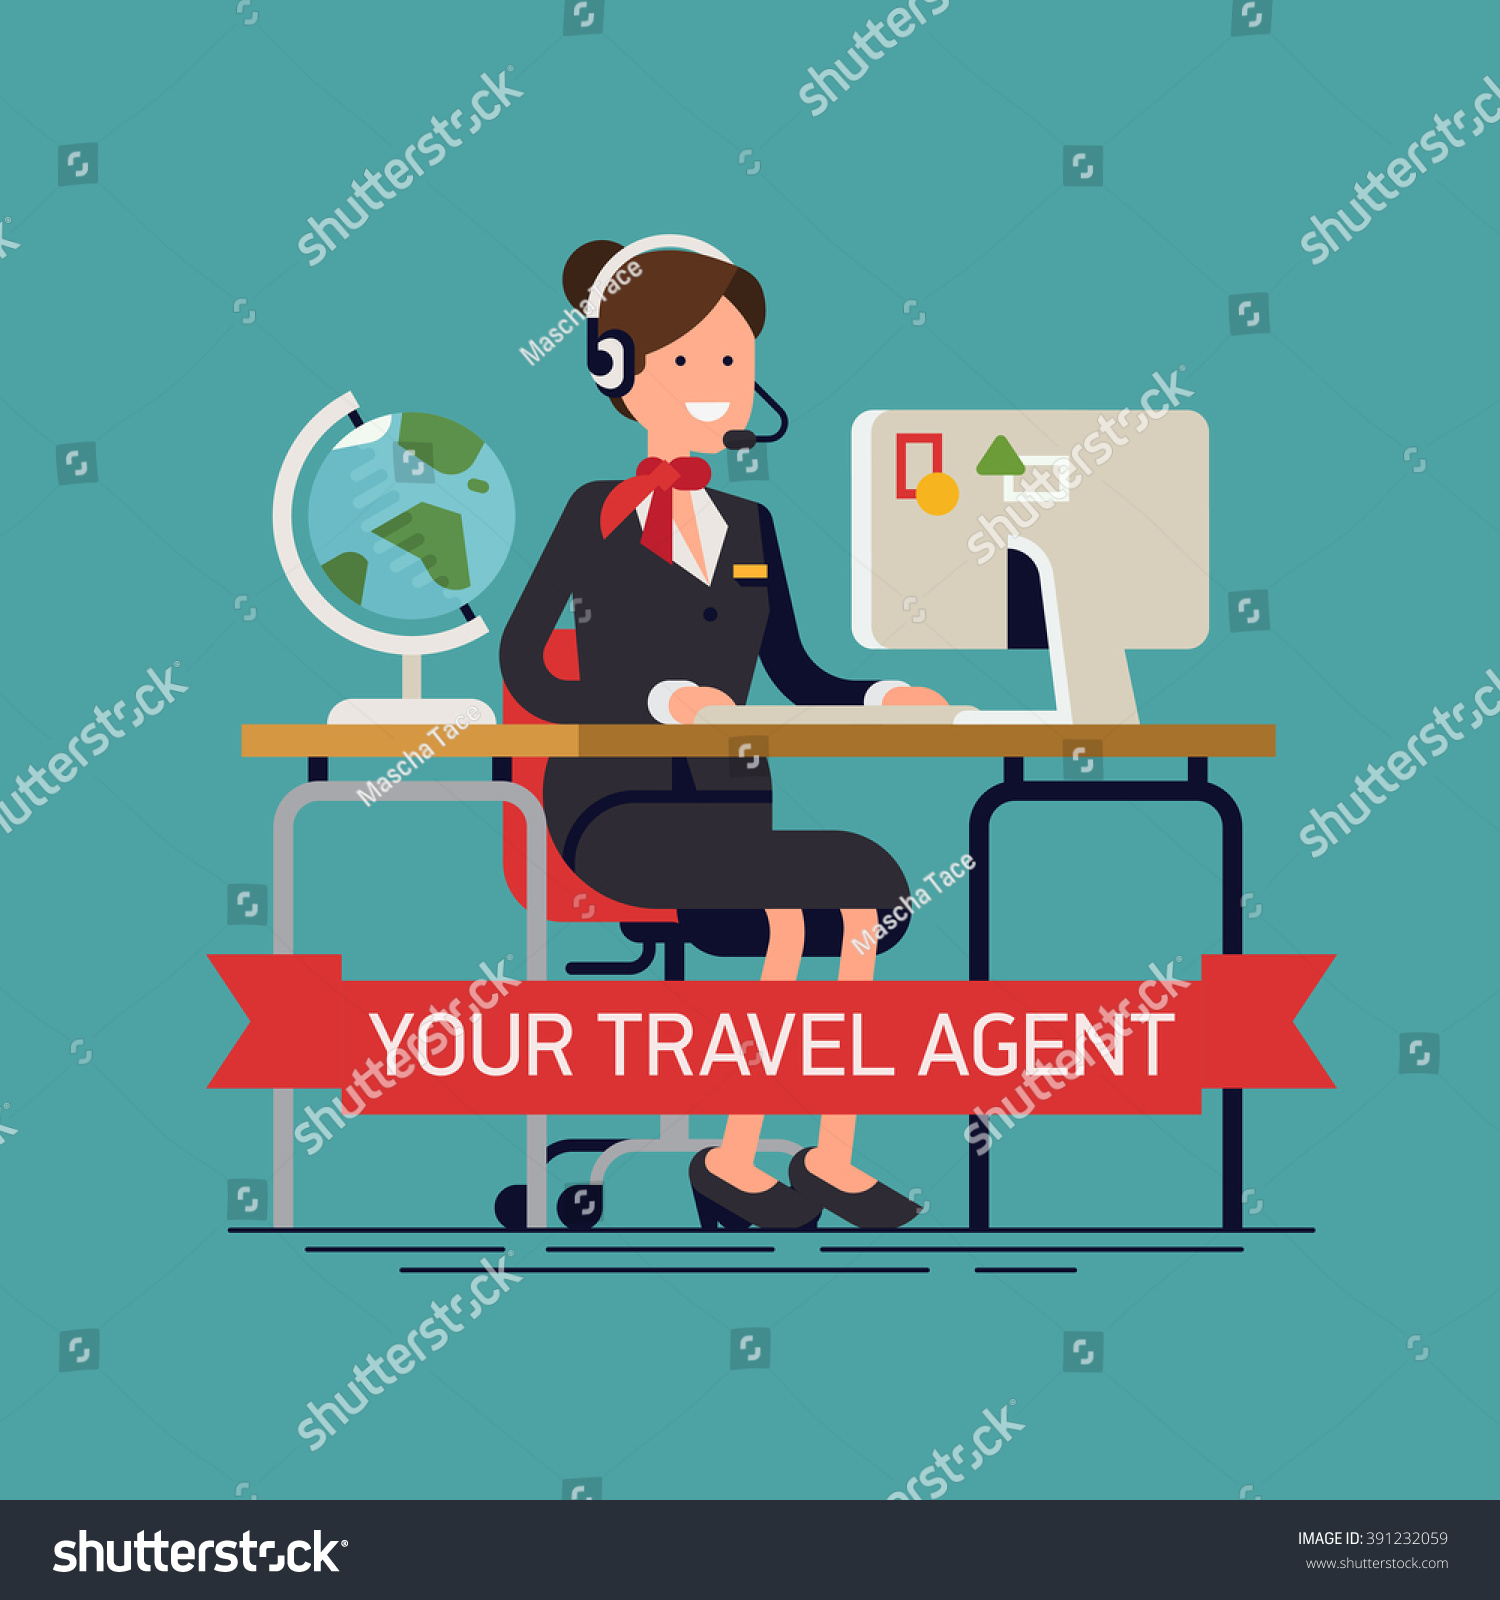 travel agent clipart free - photo #24